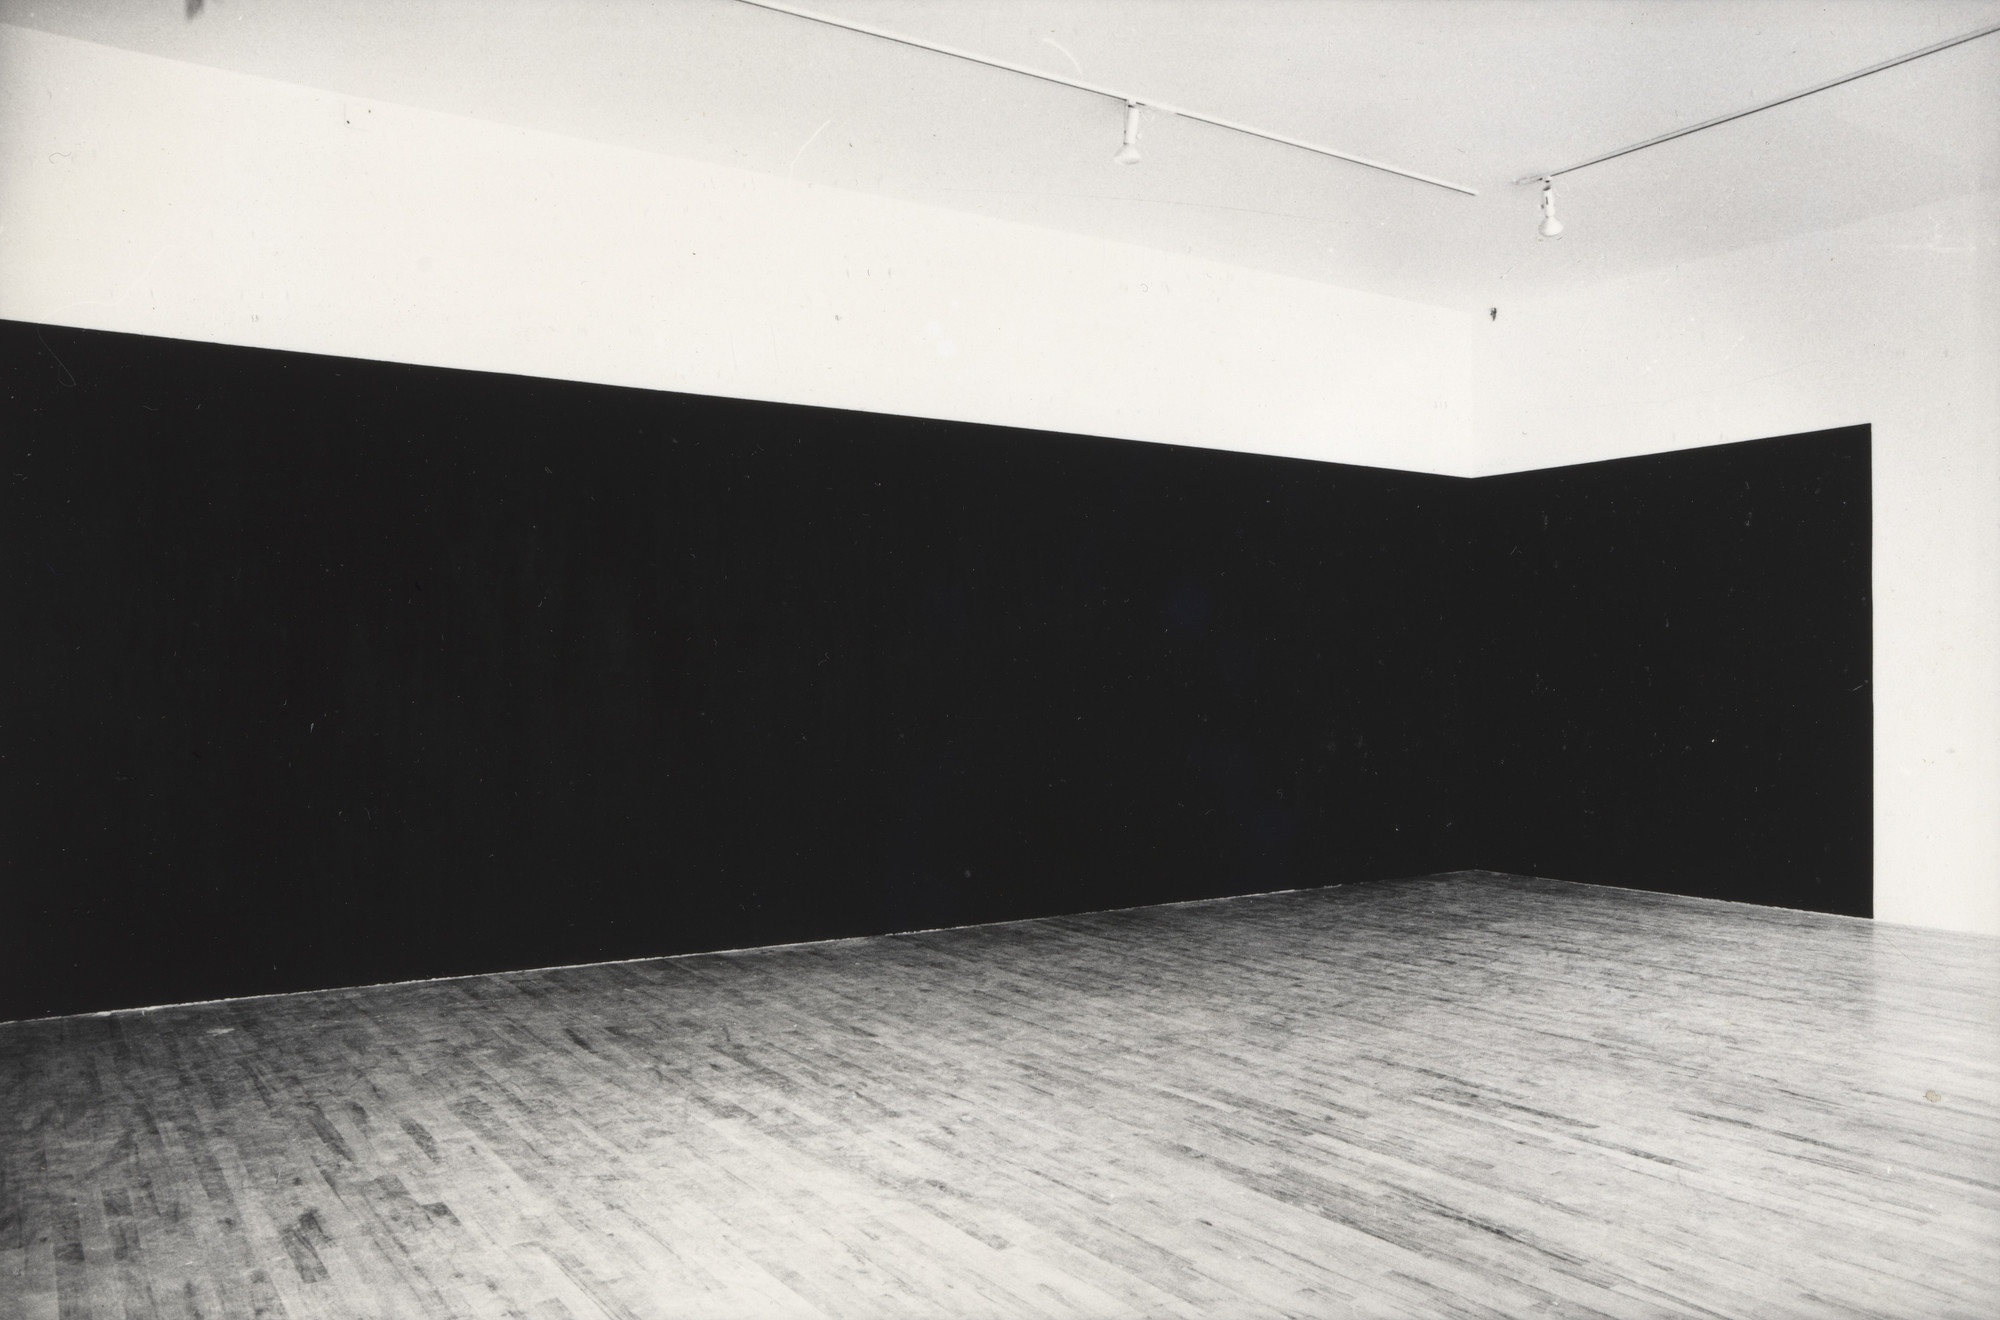 Installation view of work by Richard Serra in the P.S. 1 exhibition, 